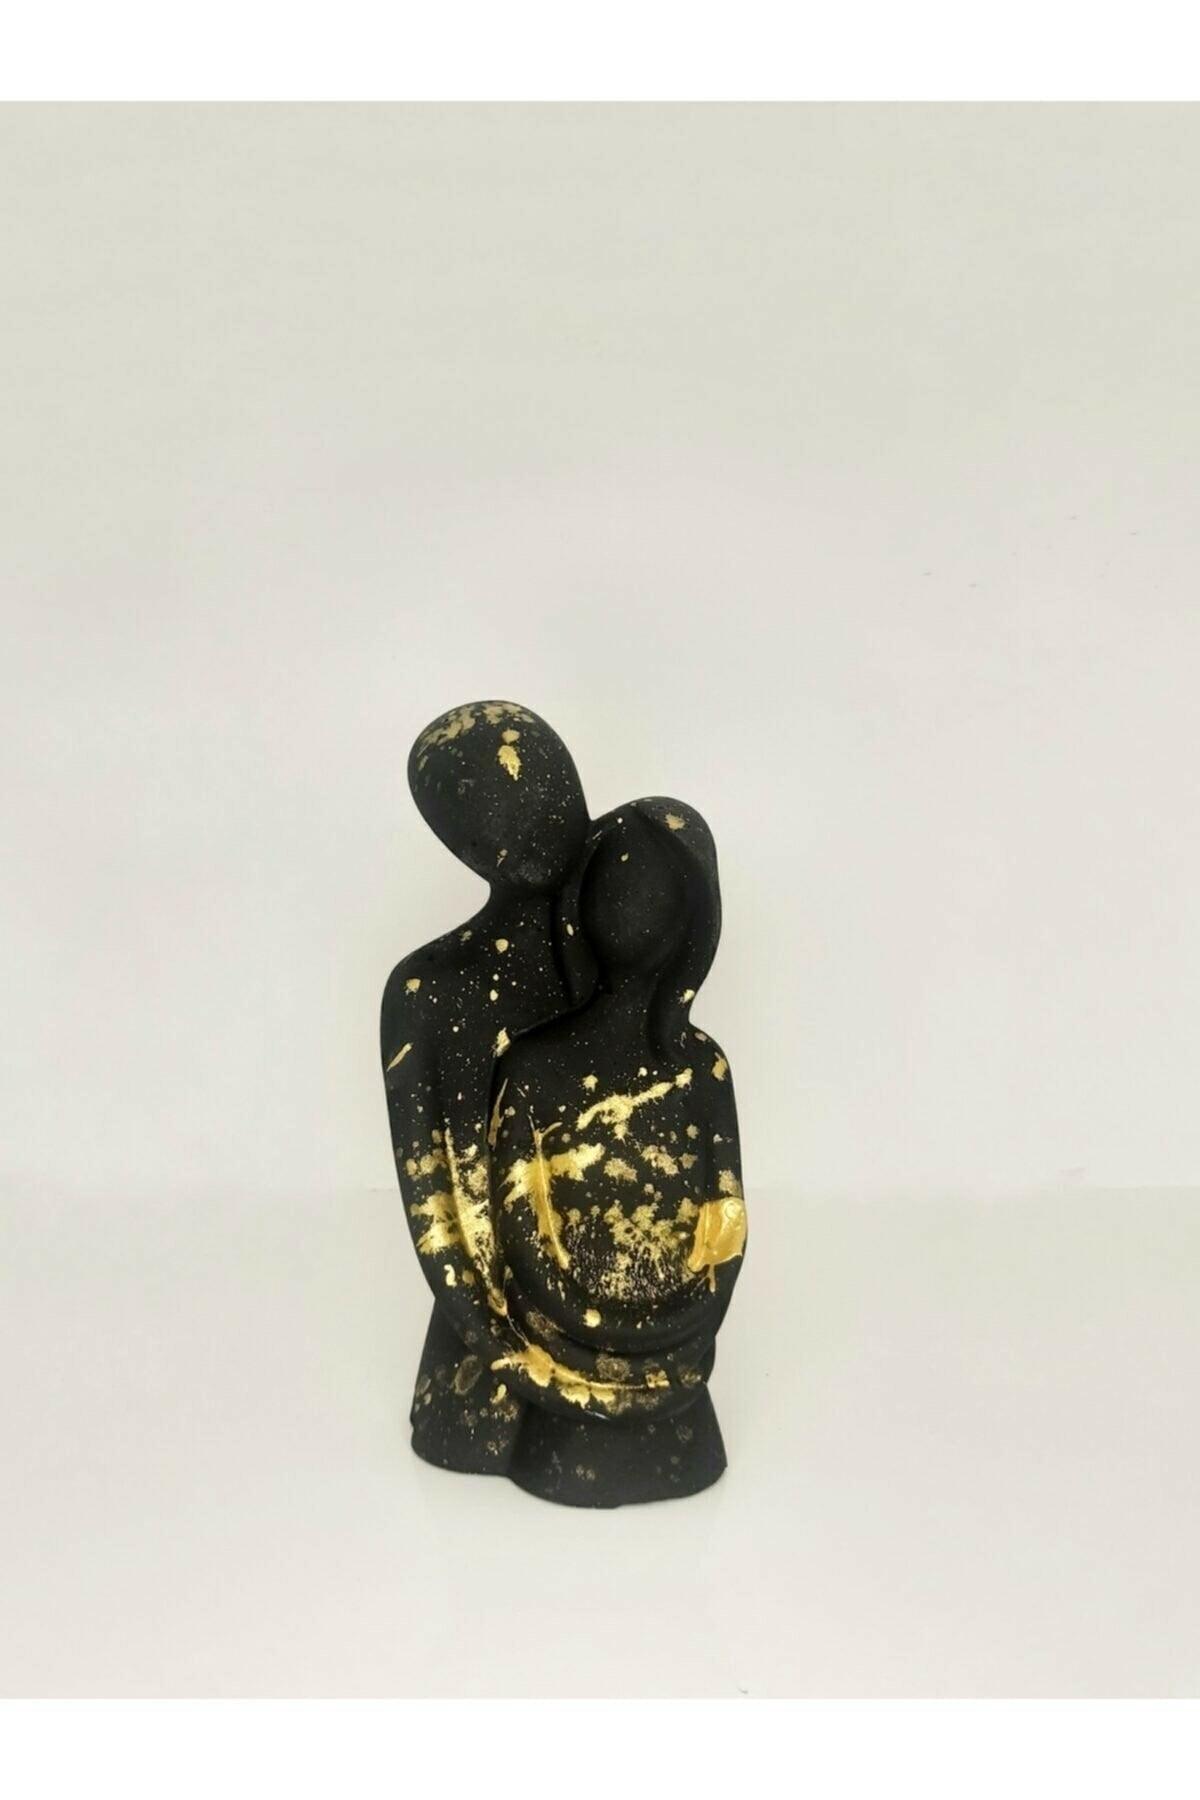 Abstract Wrapped Couple Black Gold Detail Sculpture / Bust / Trinket - Swordslife